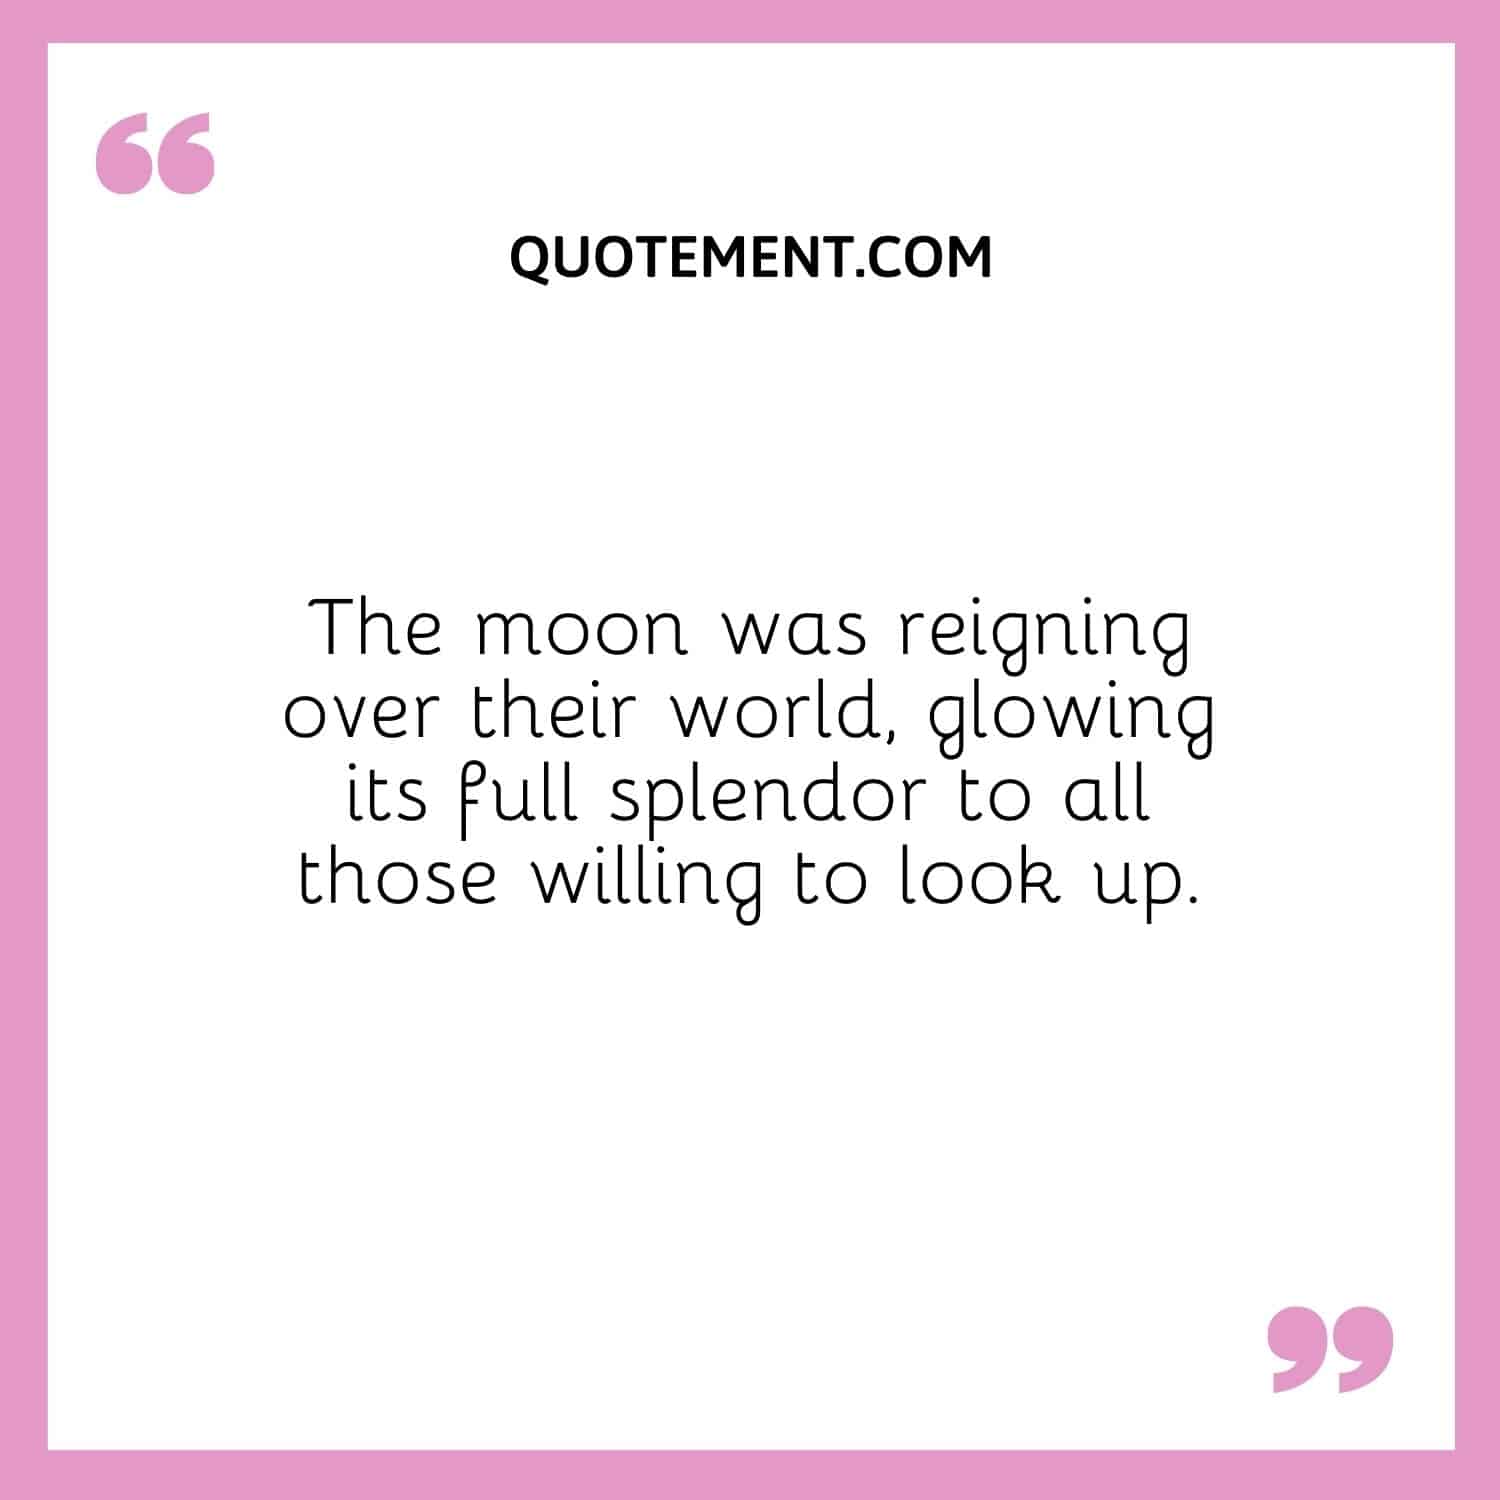 The moon was reigning over their world, glowing its full splendor to all those willing to look up.